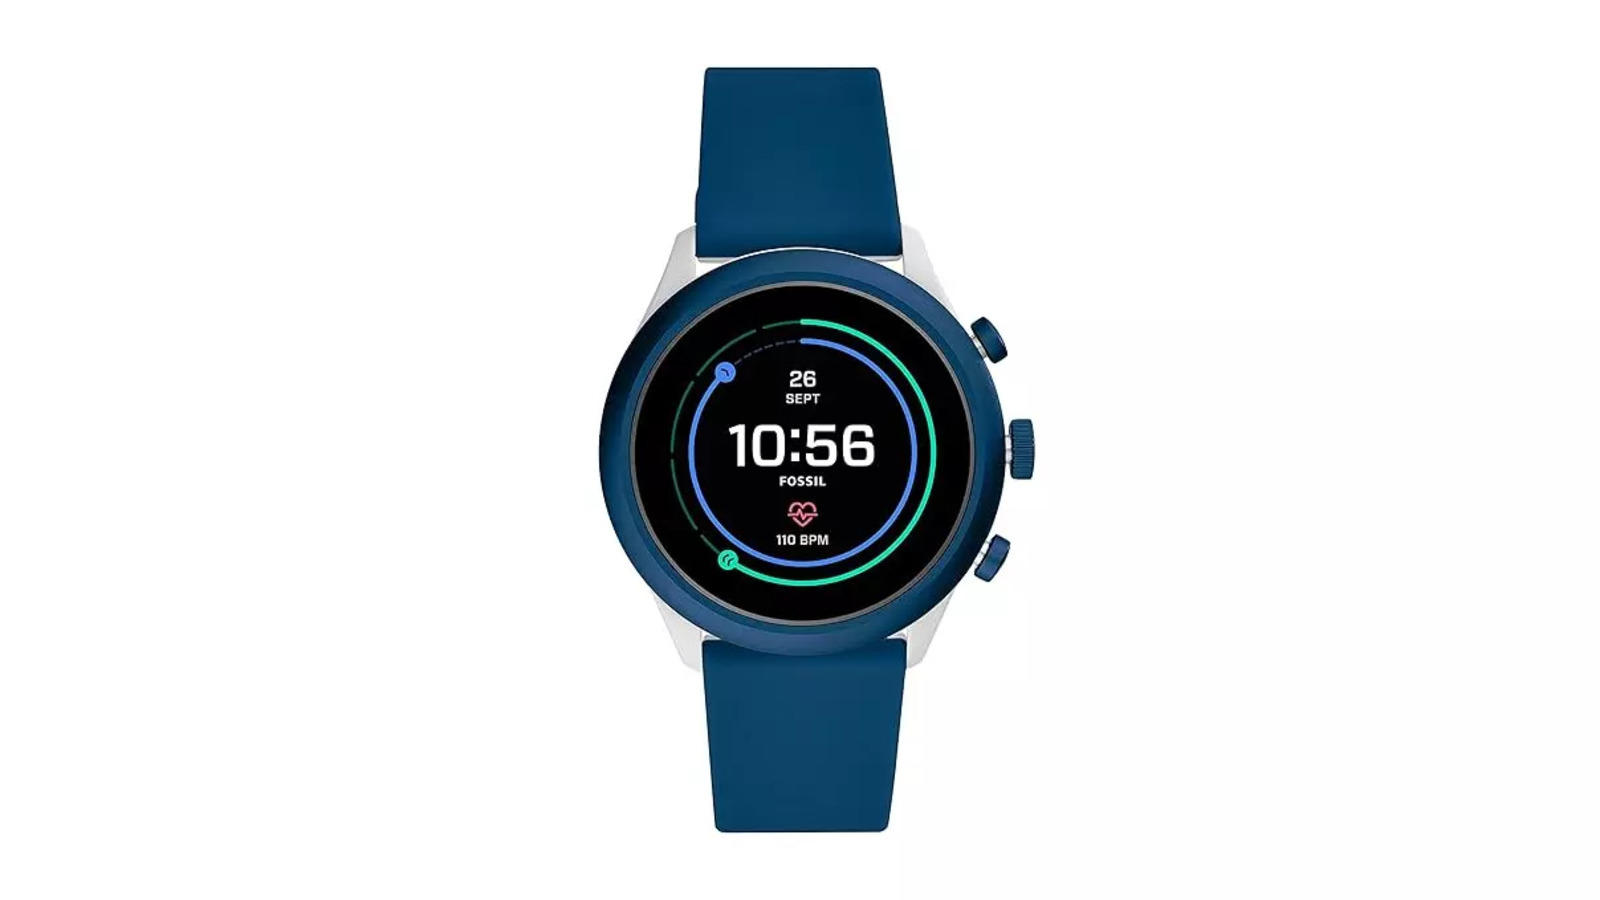 fossil smartwatch: Best Fossil smartwatches - Style and innovation